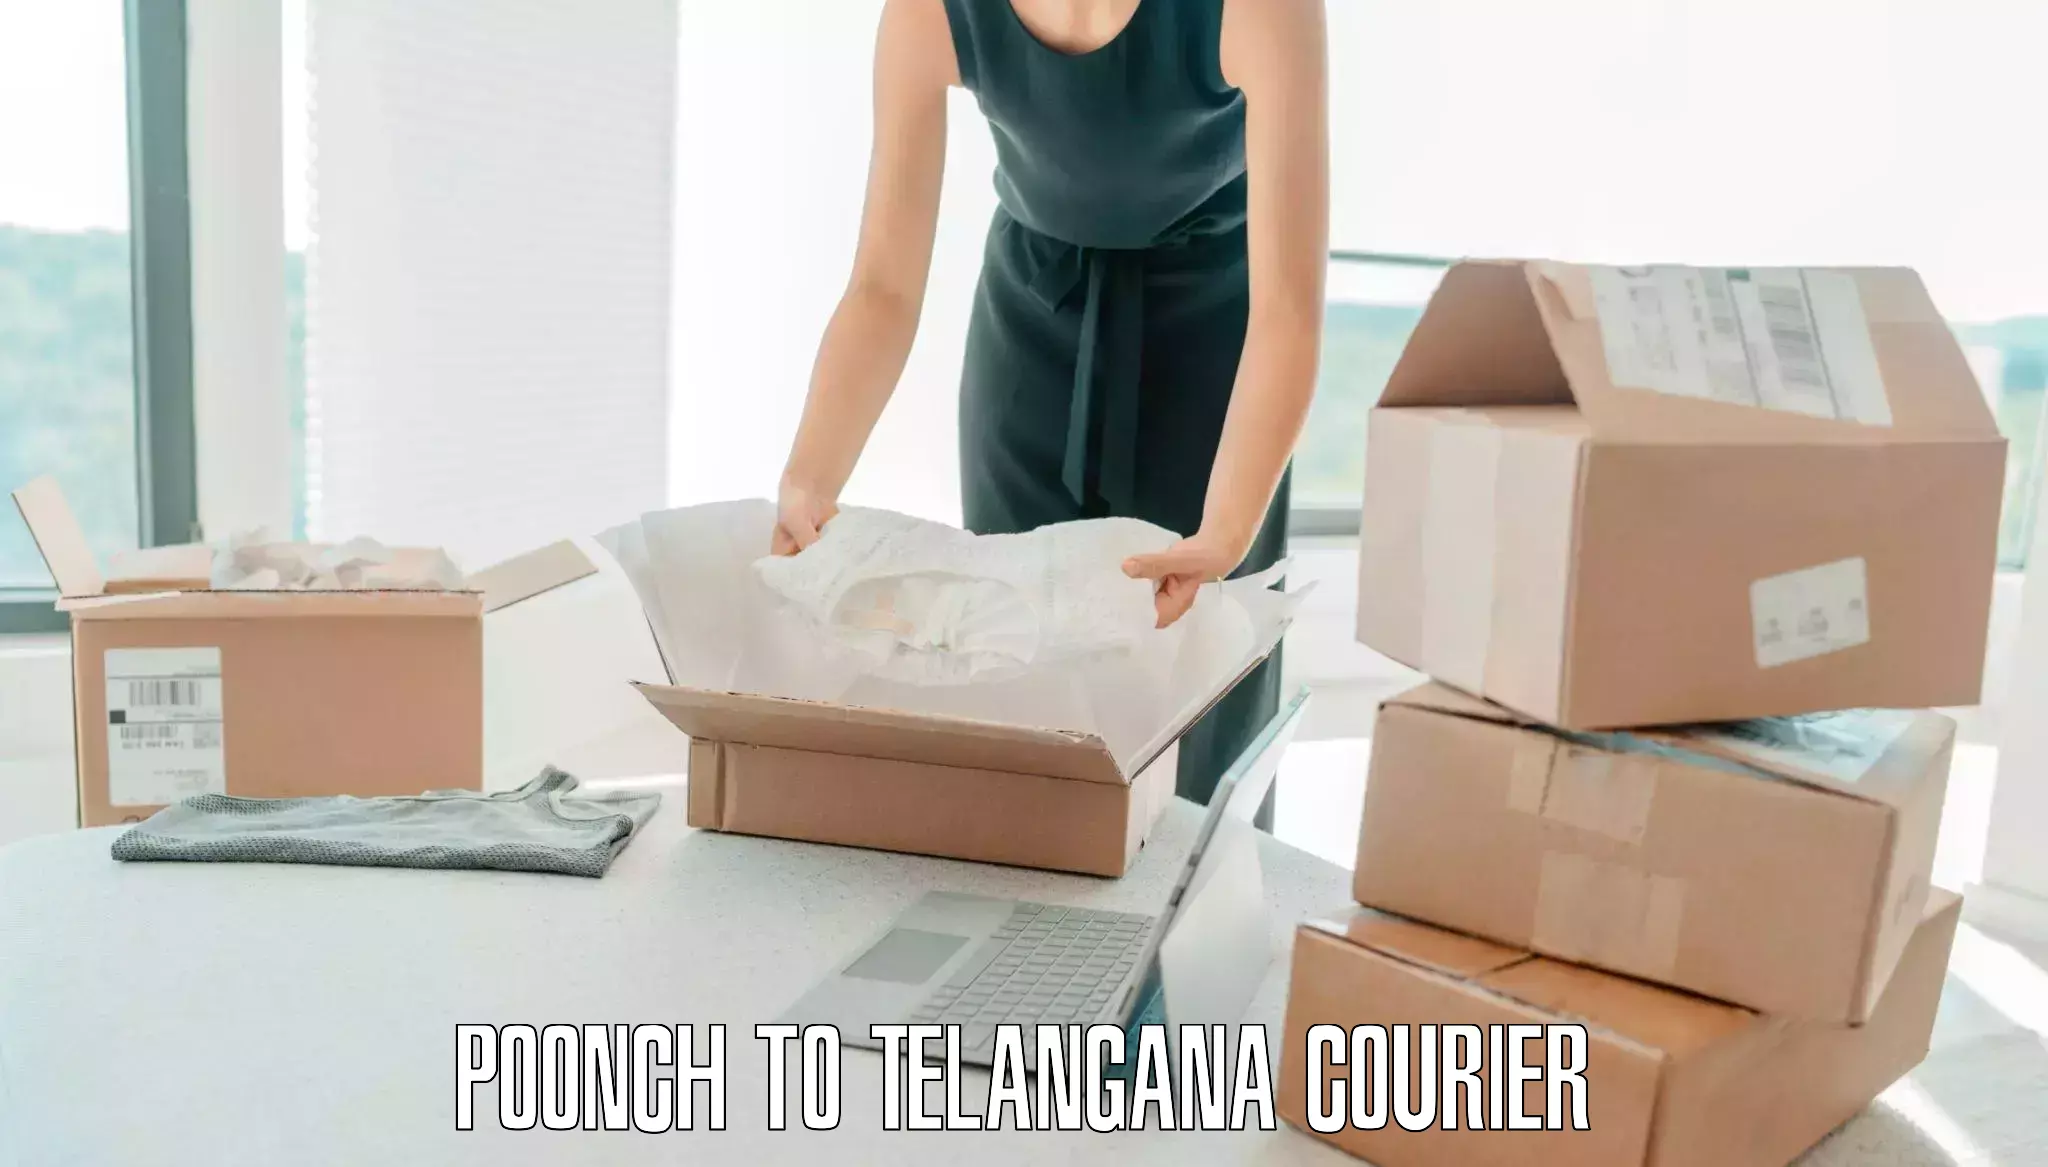 Baggage transport quote Poonch to University of Hyderabad